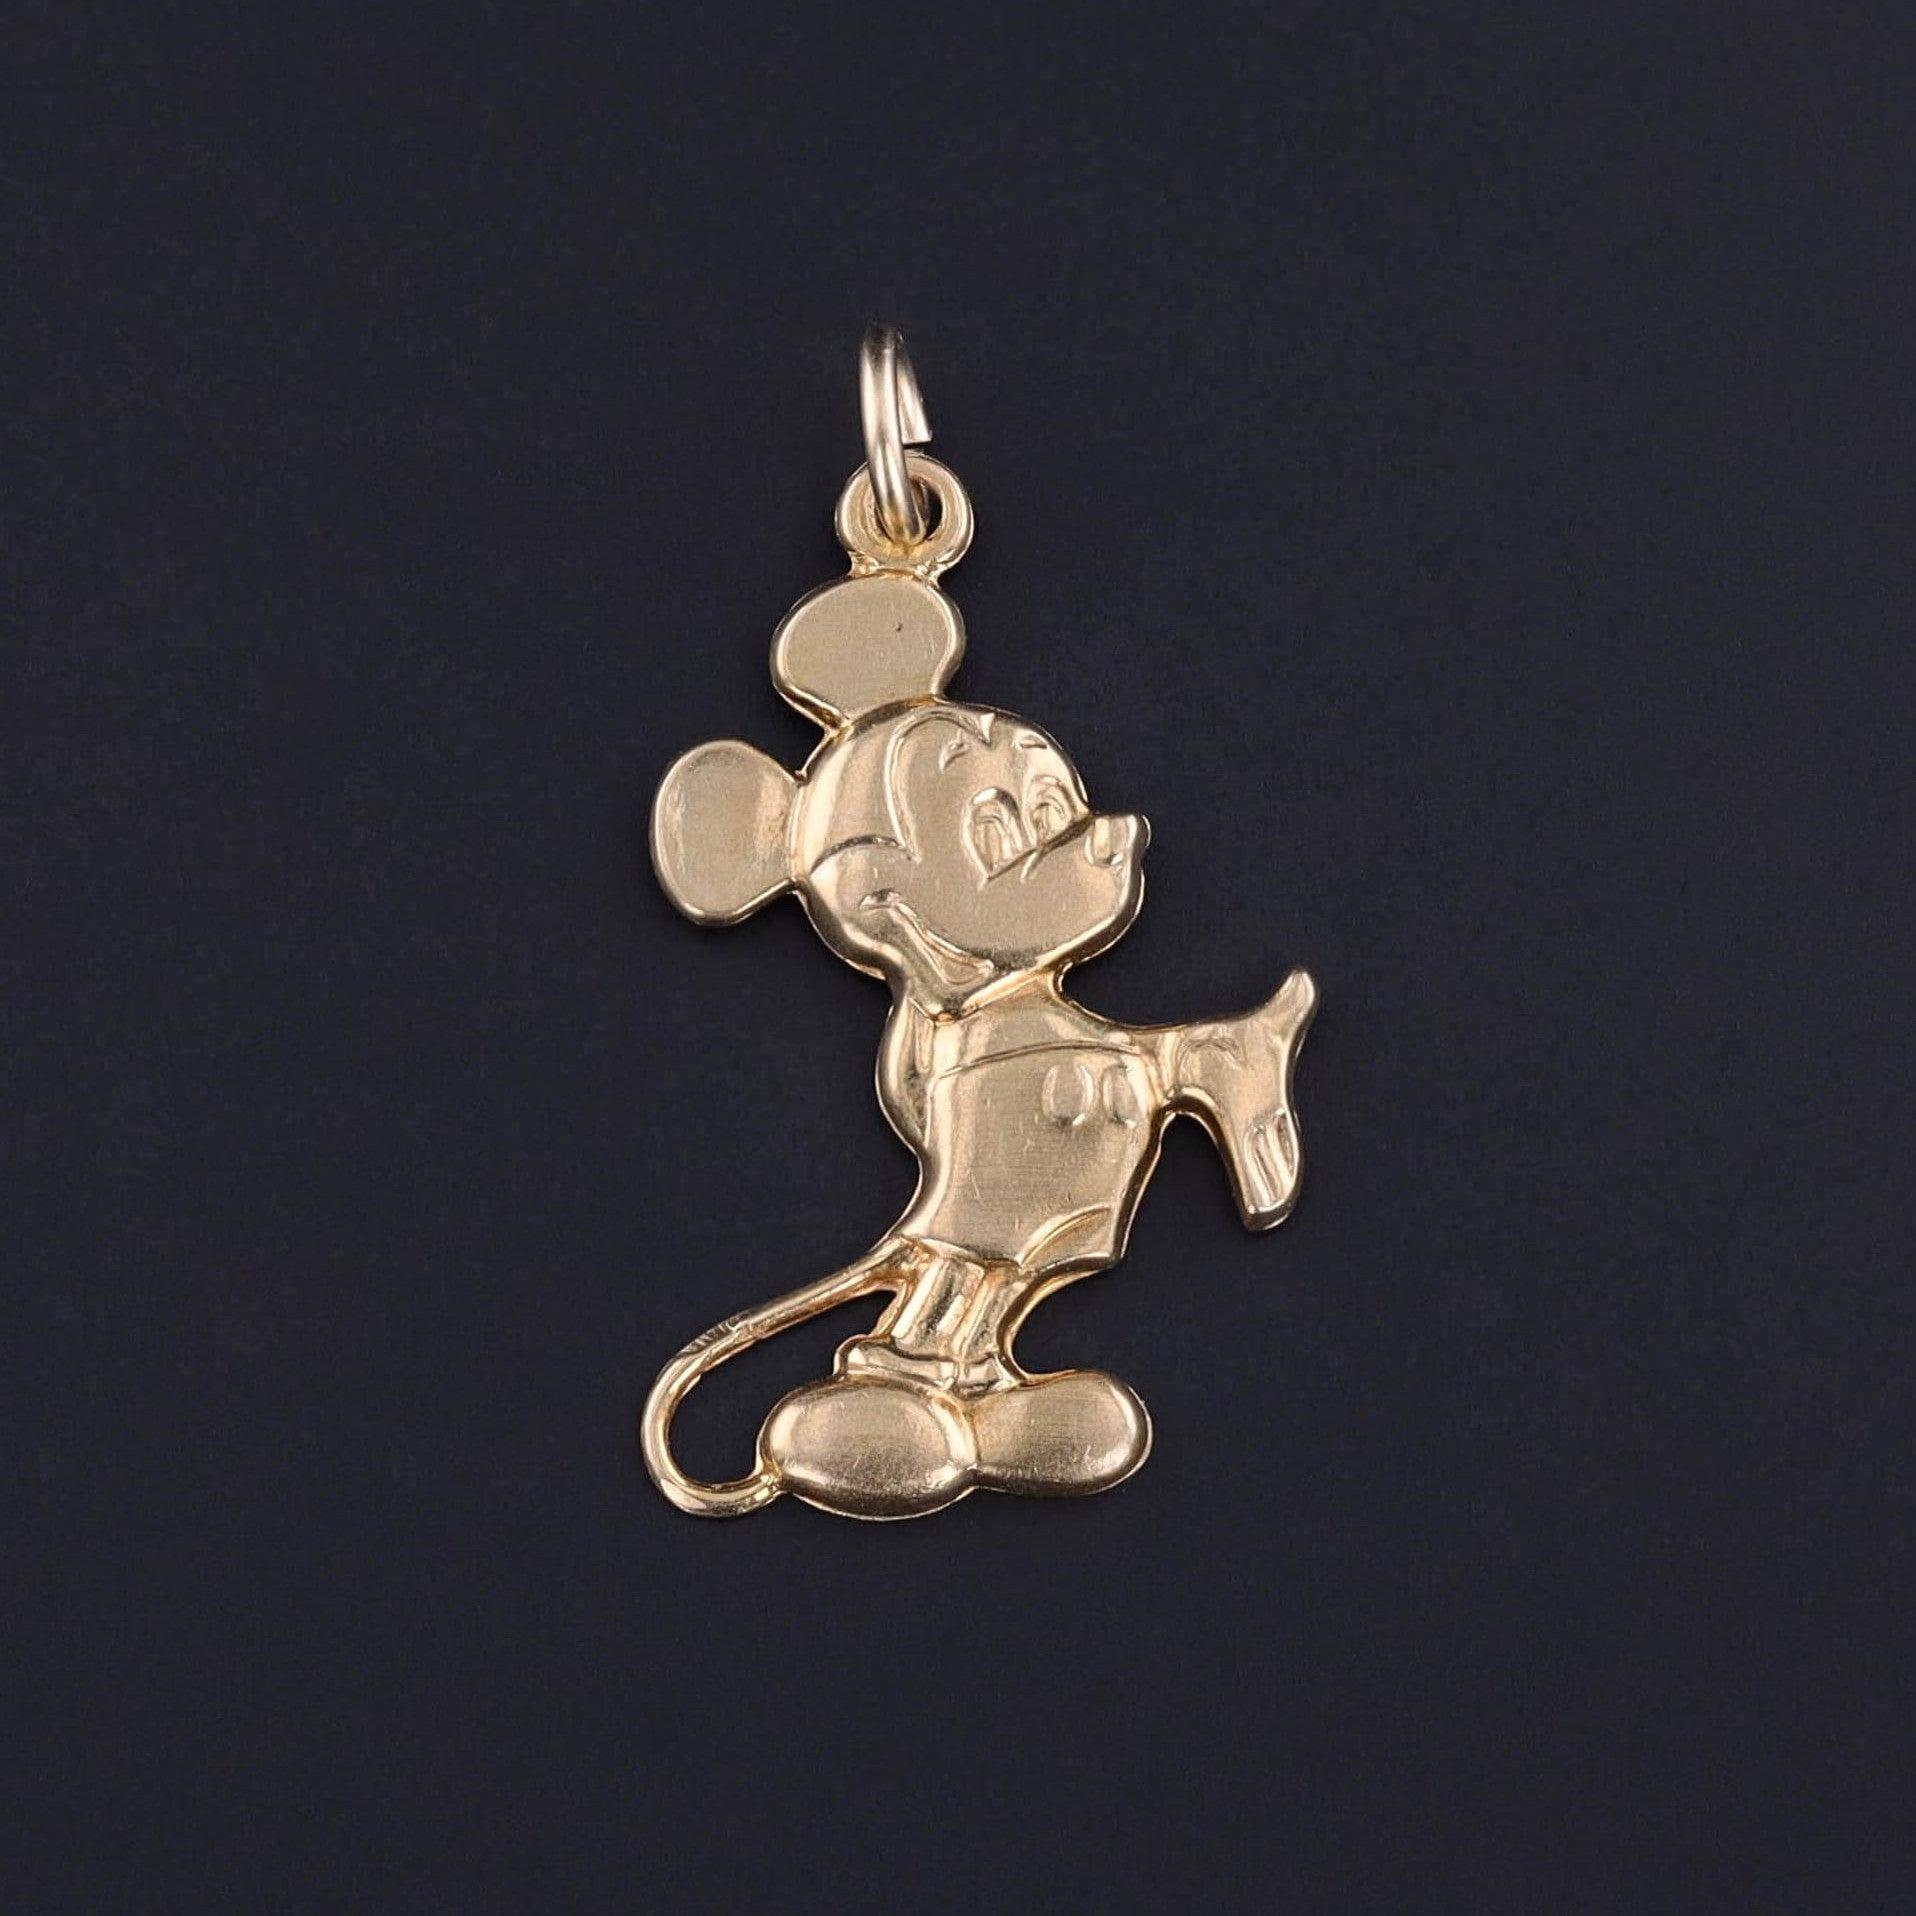 Vintage Mickey Mouse Charm of 14k Gold